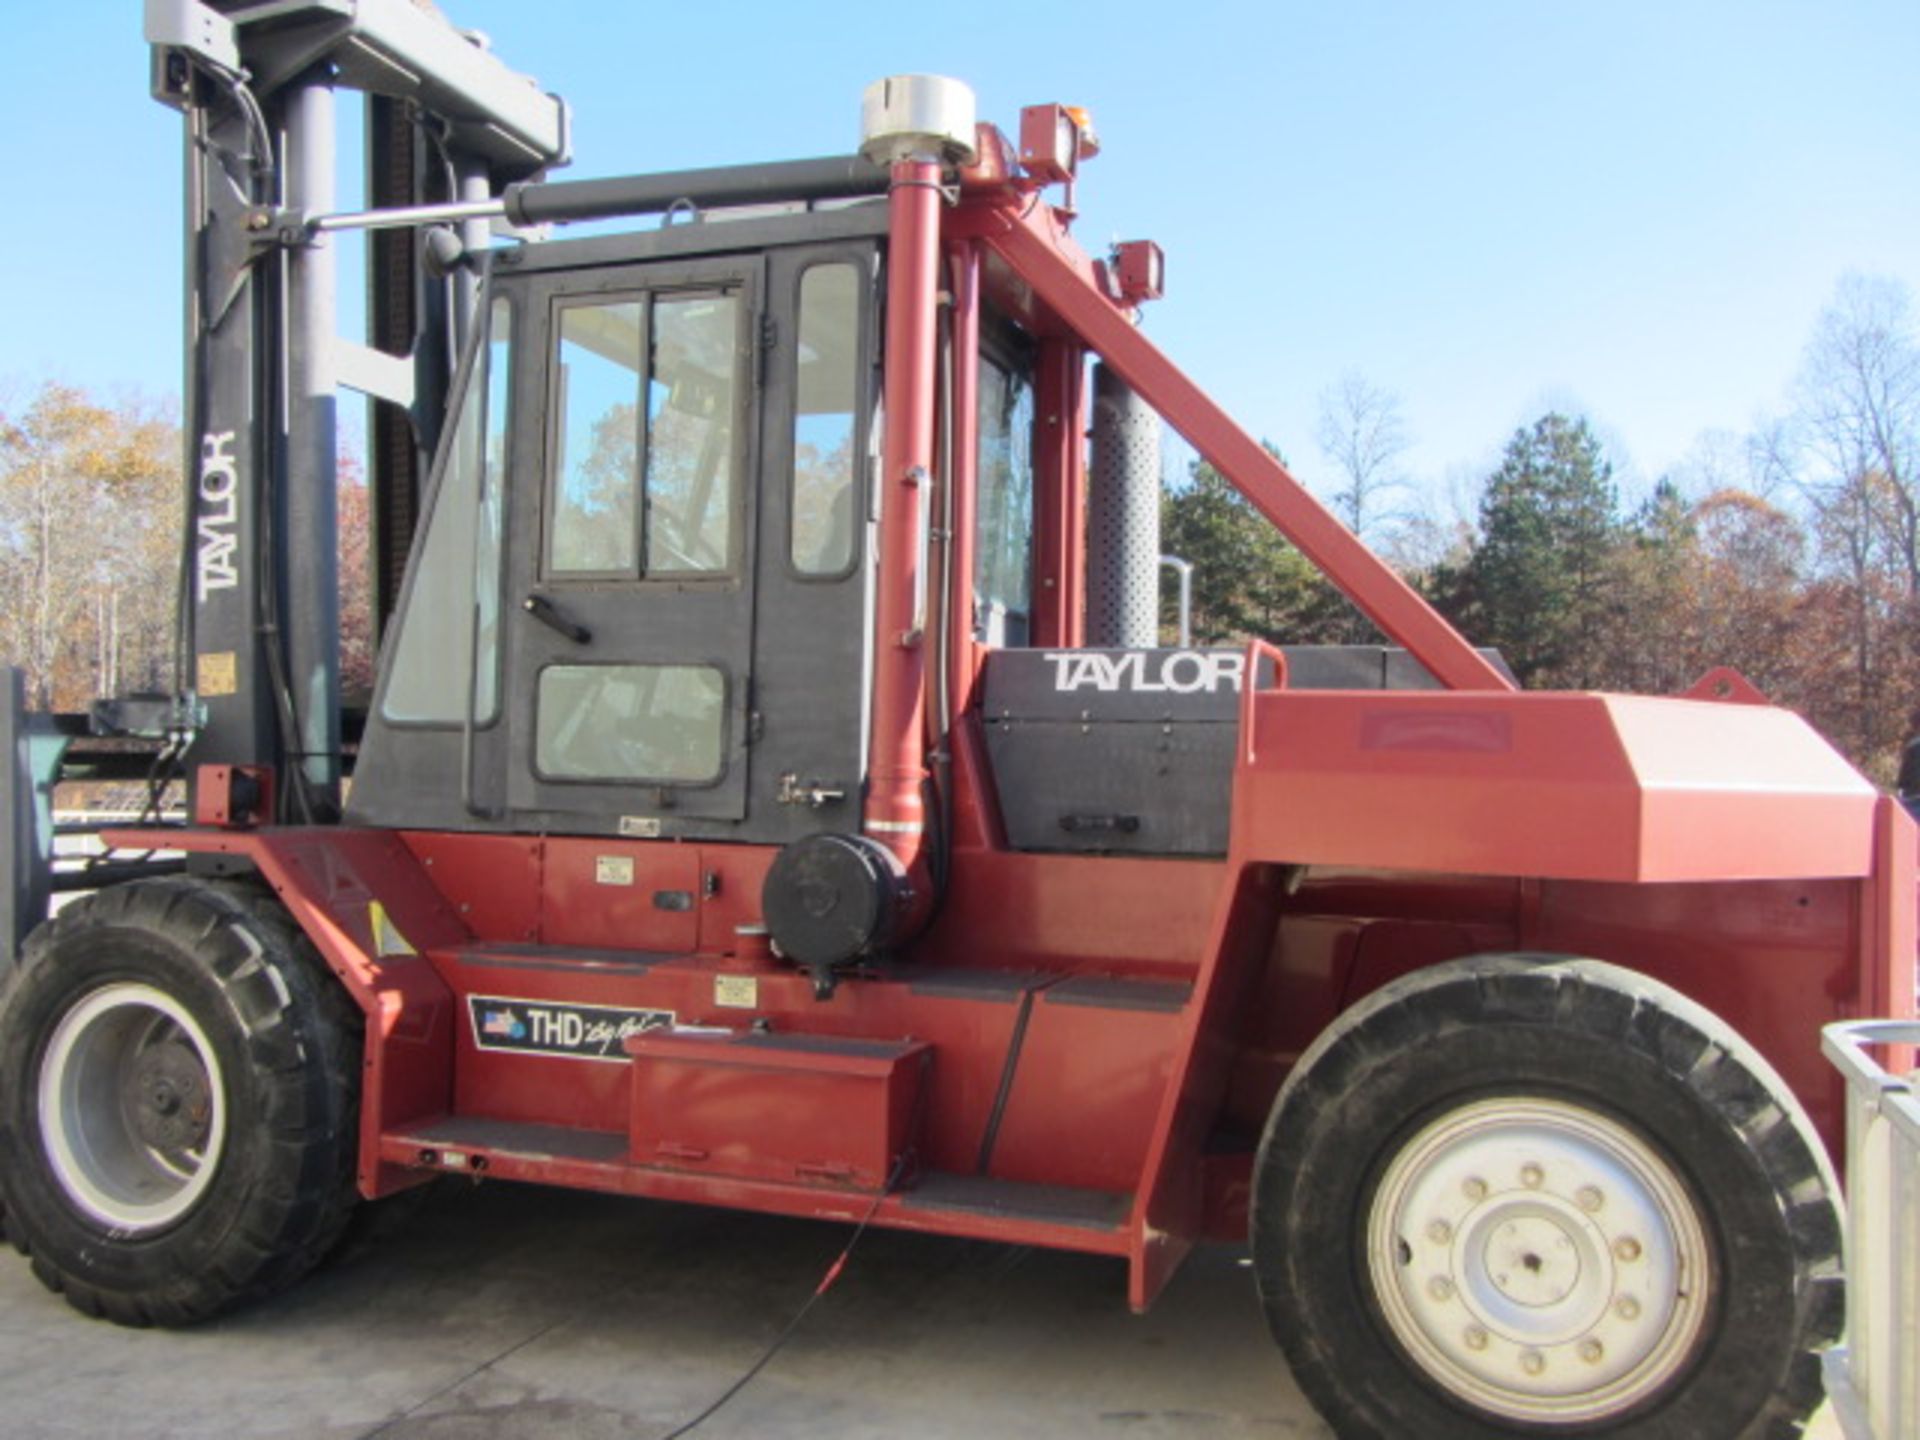 Taylor THD ''Big Red'' T-300M 30,000lb Forklift with Hydraulic Mast, Fork Shift, 96'' Forks, - Image 14 of 14